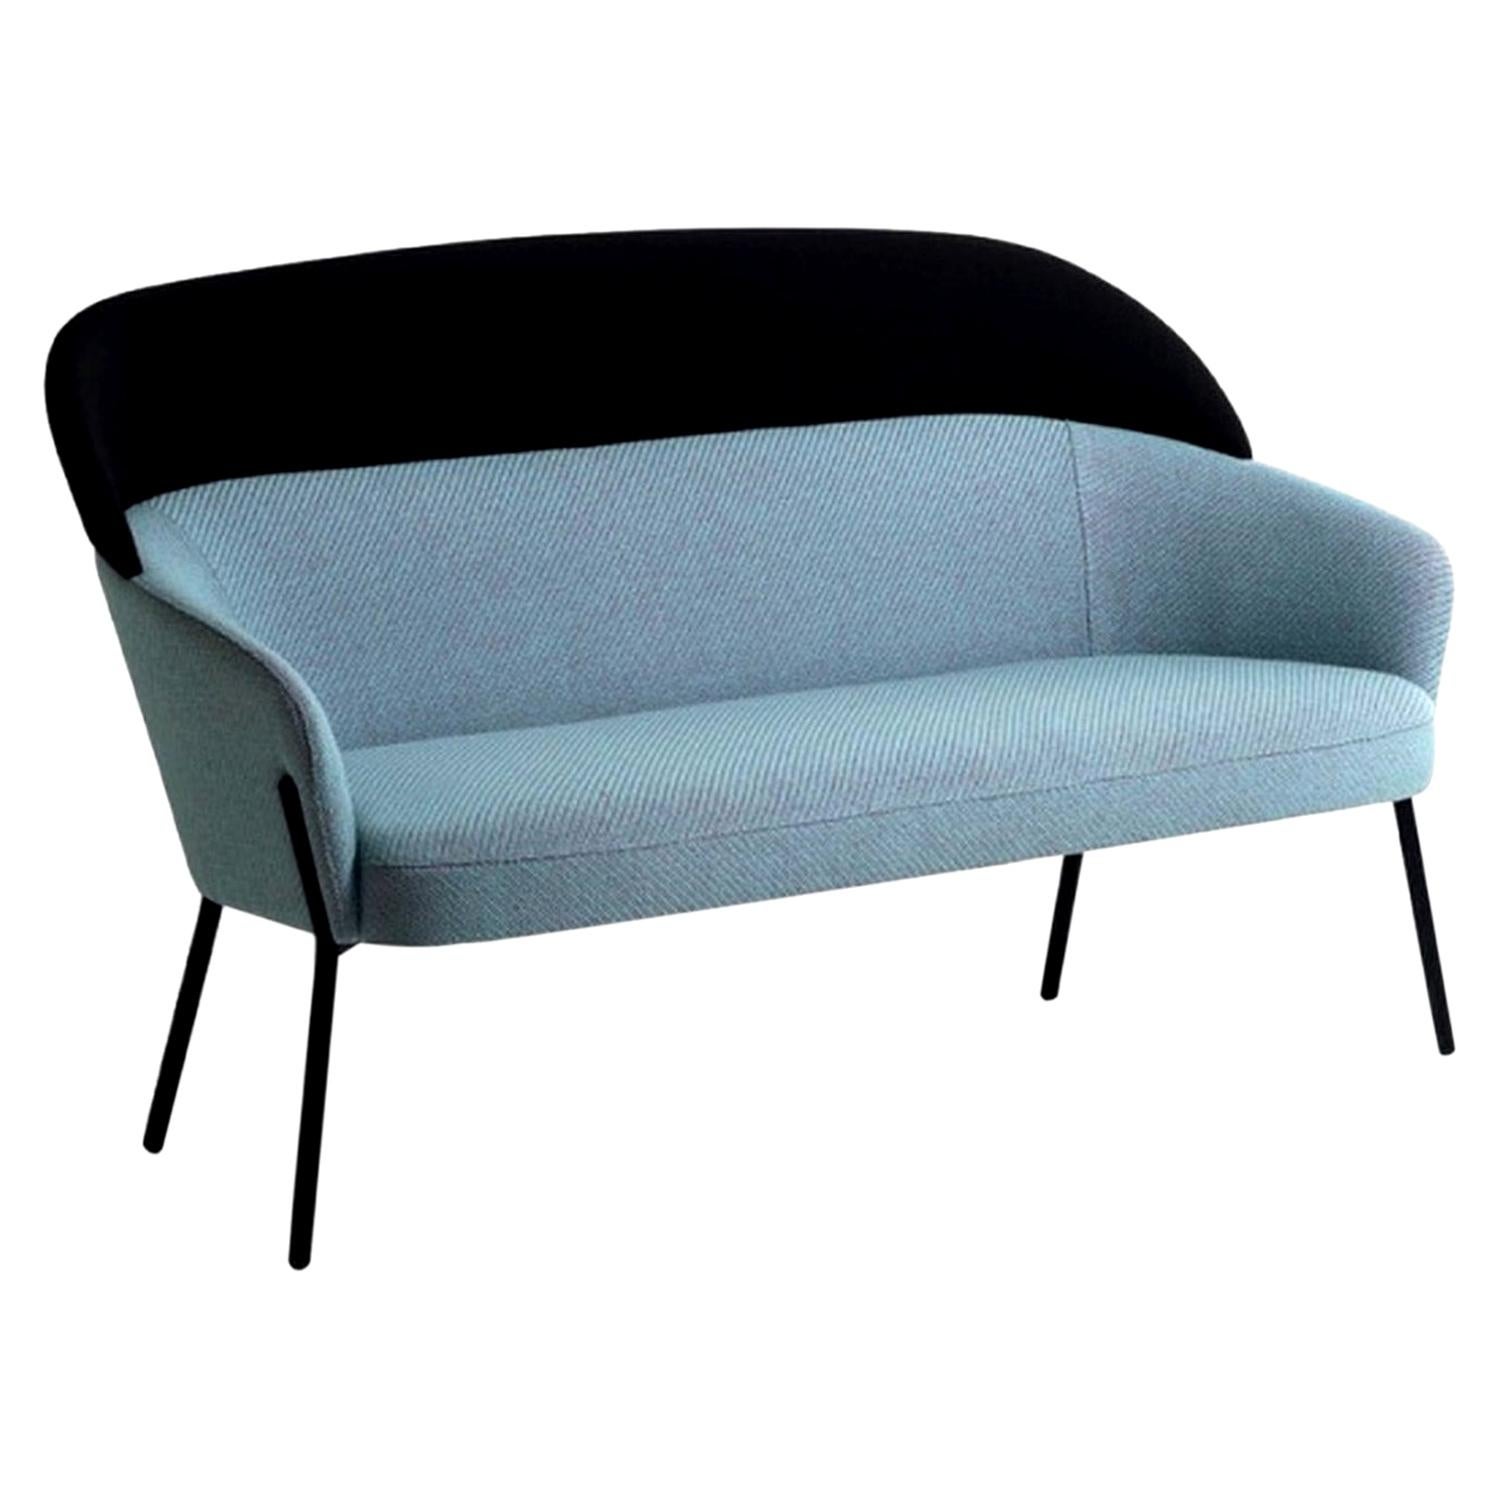 Wam Blue Sofa, Designed by Marco Zito, Made in Italy